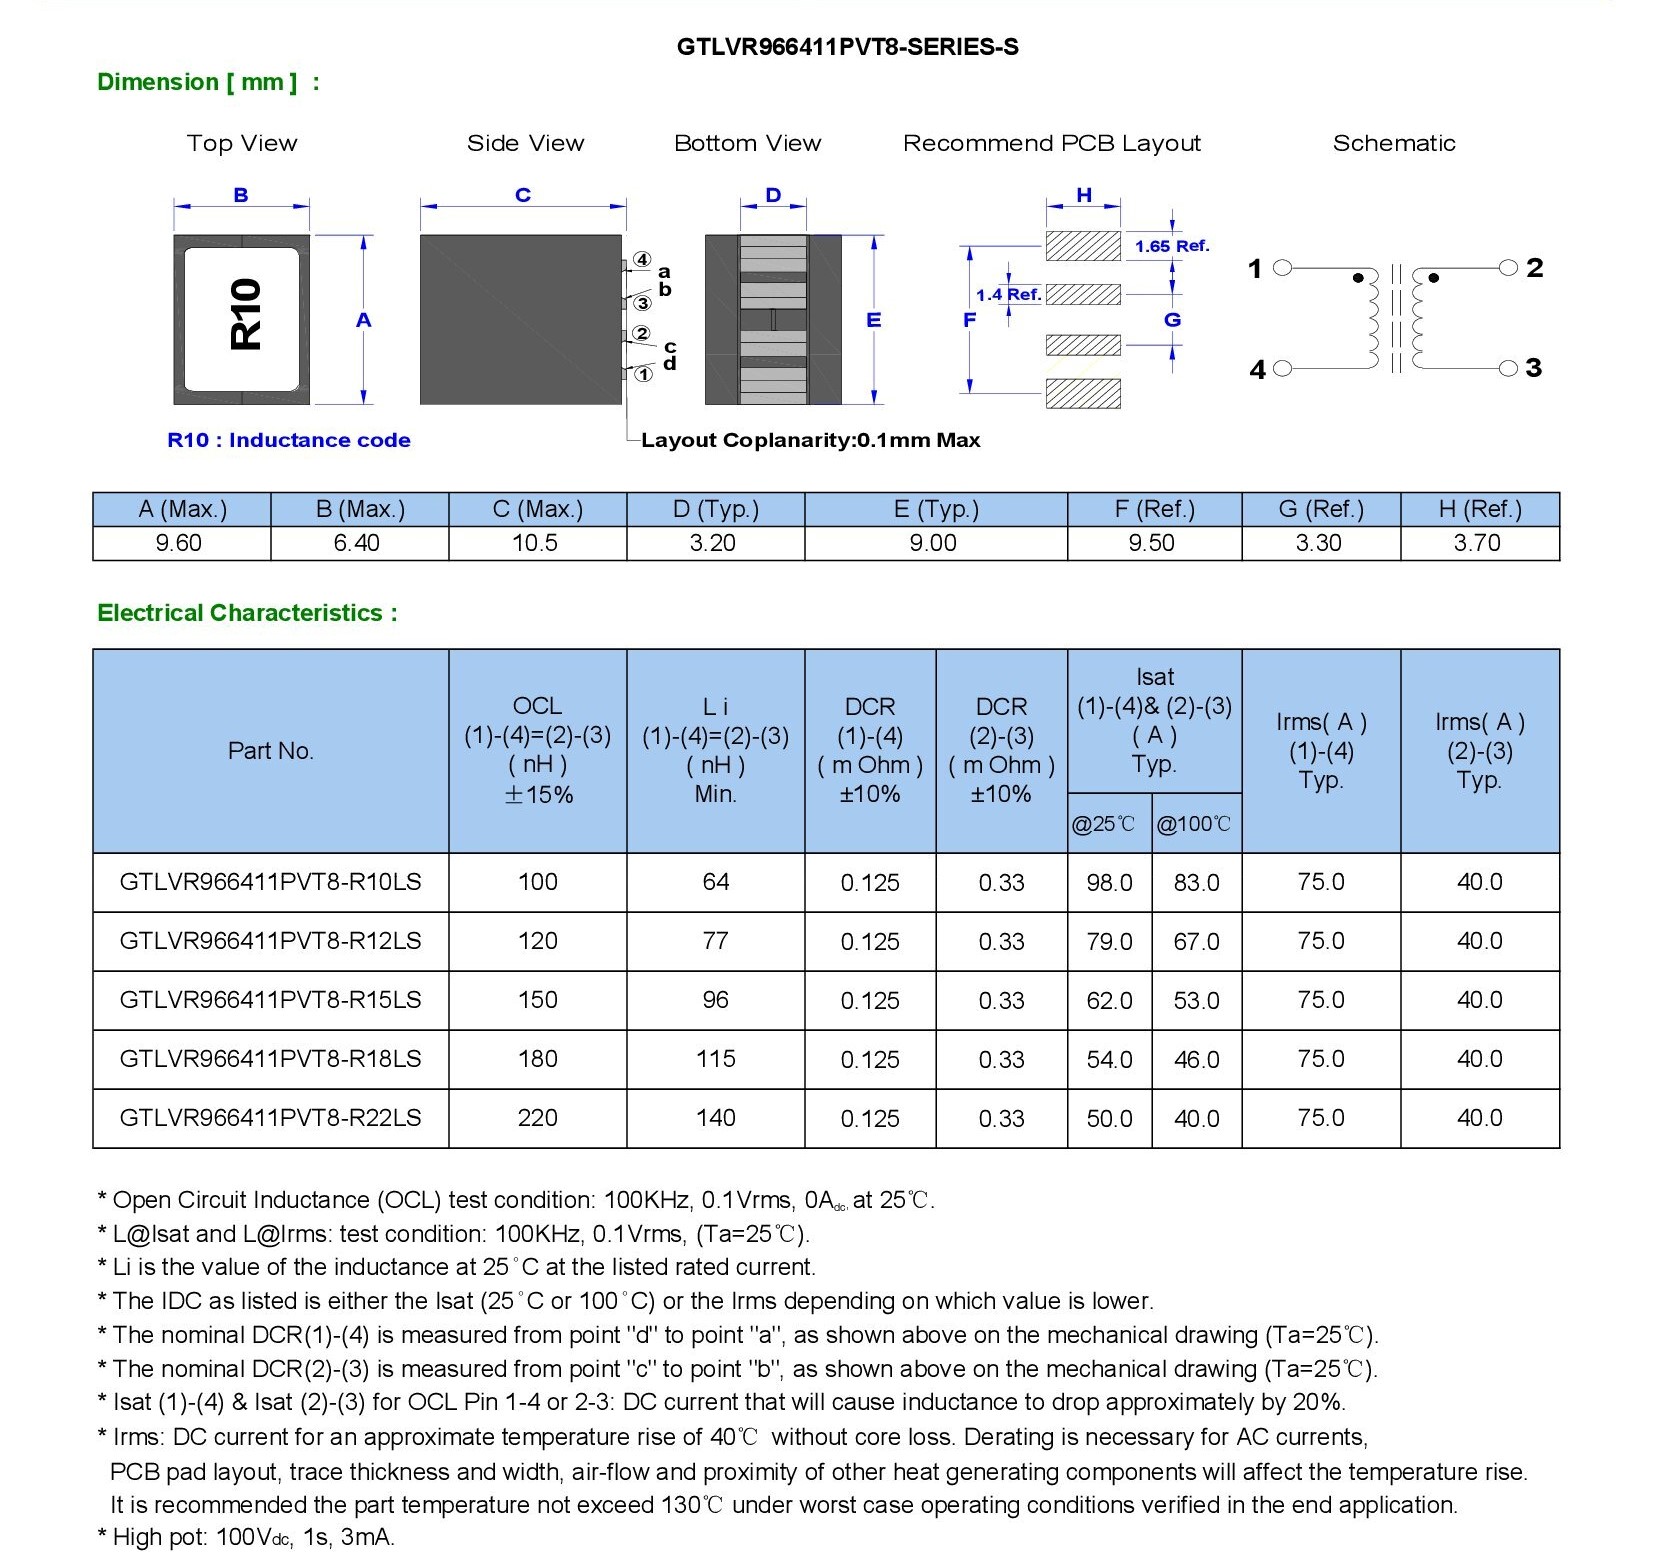 GOTREND-Article-TLVR inductor Key Specification / Electrical Characteristics